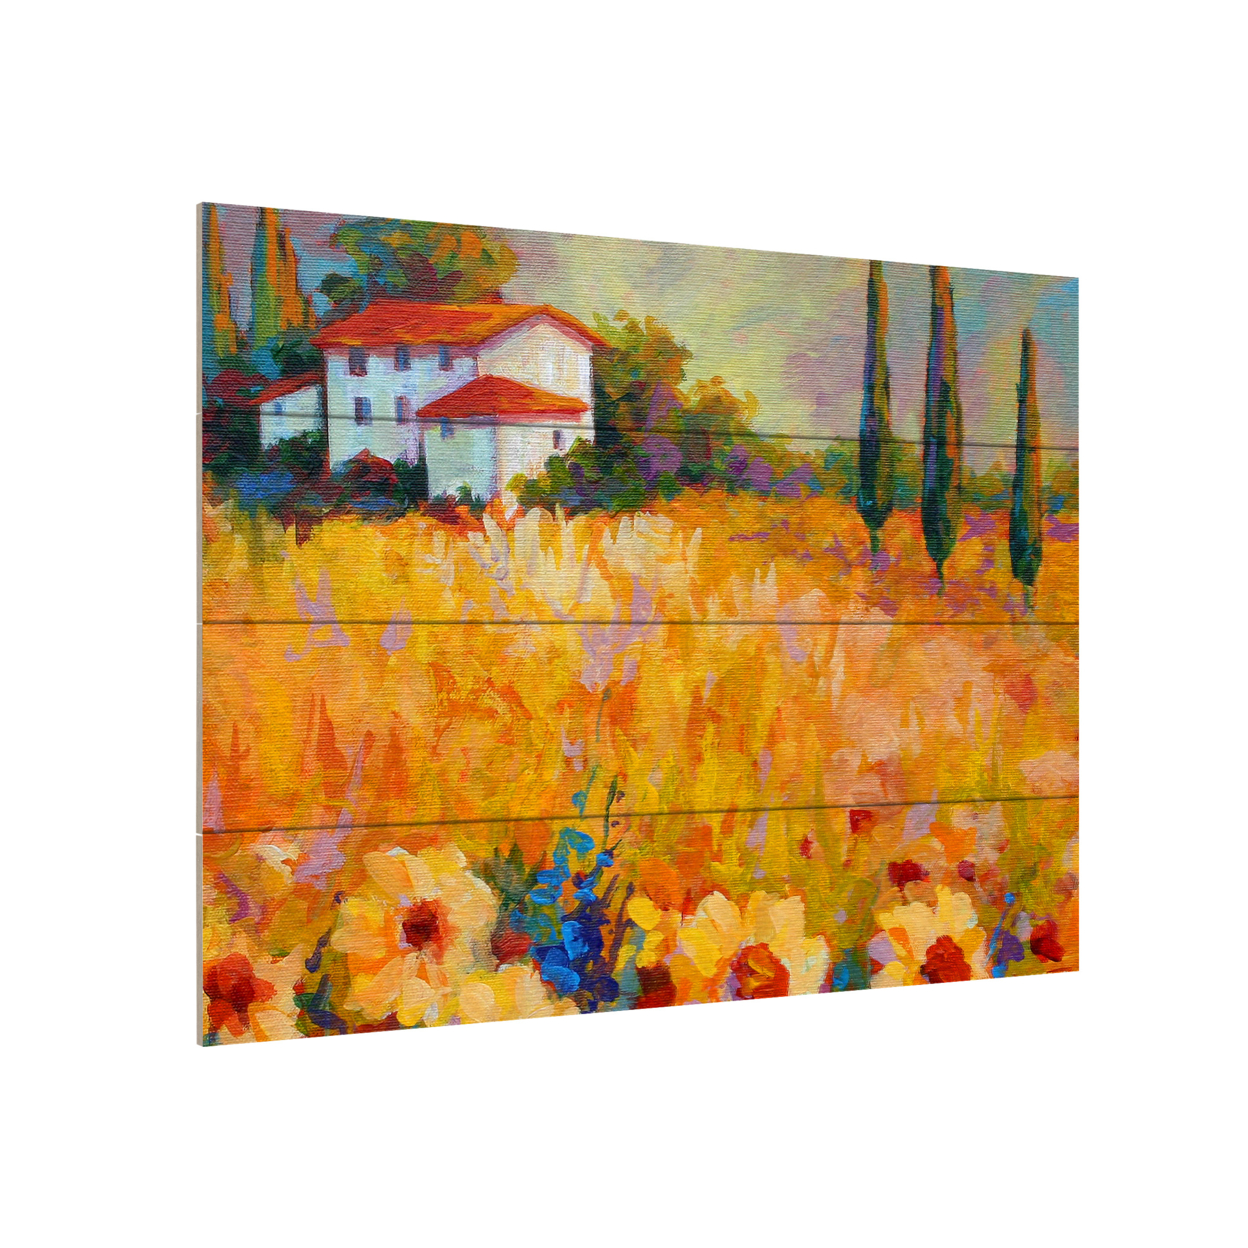 Wall Art 12 X 16 Inches Titled Tuscan Sunflowers Ready To Hang Printed On Wooden Planks